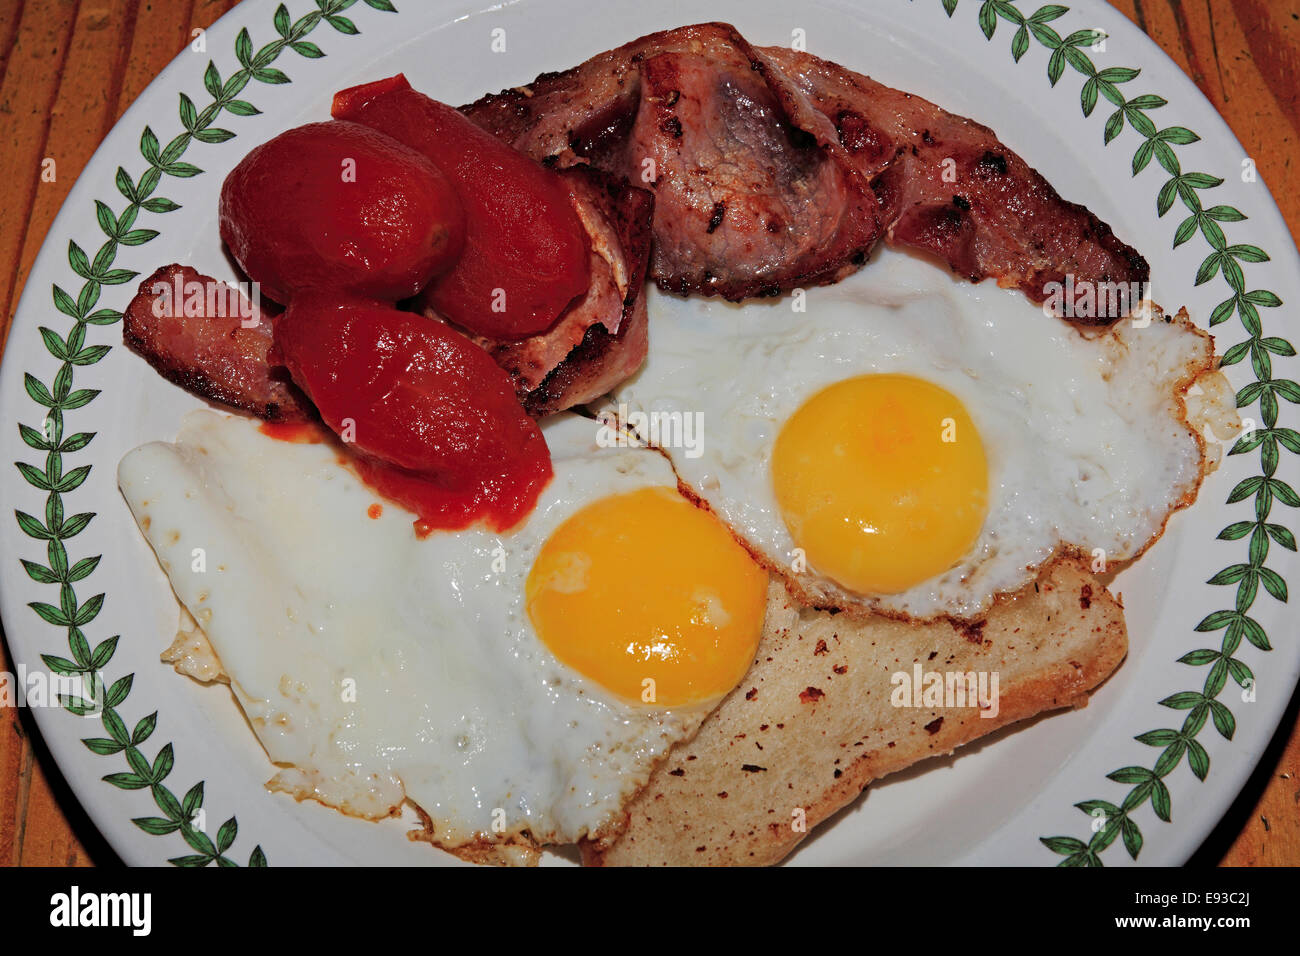 2868. Fried eggs and Bacon Stock Photo